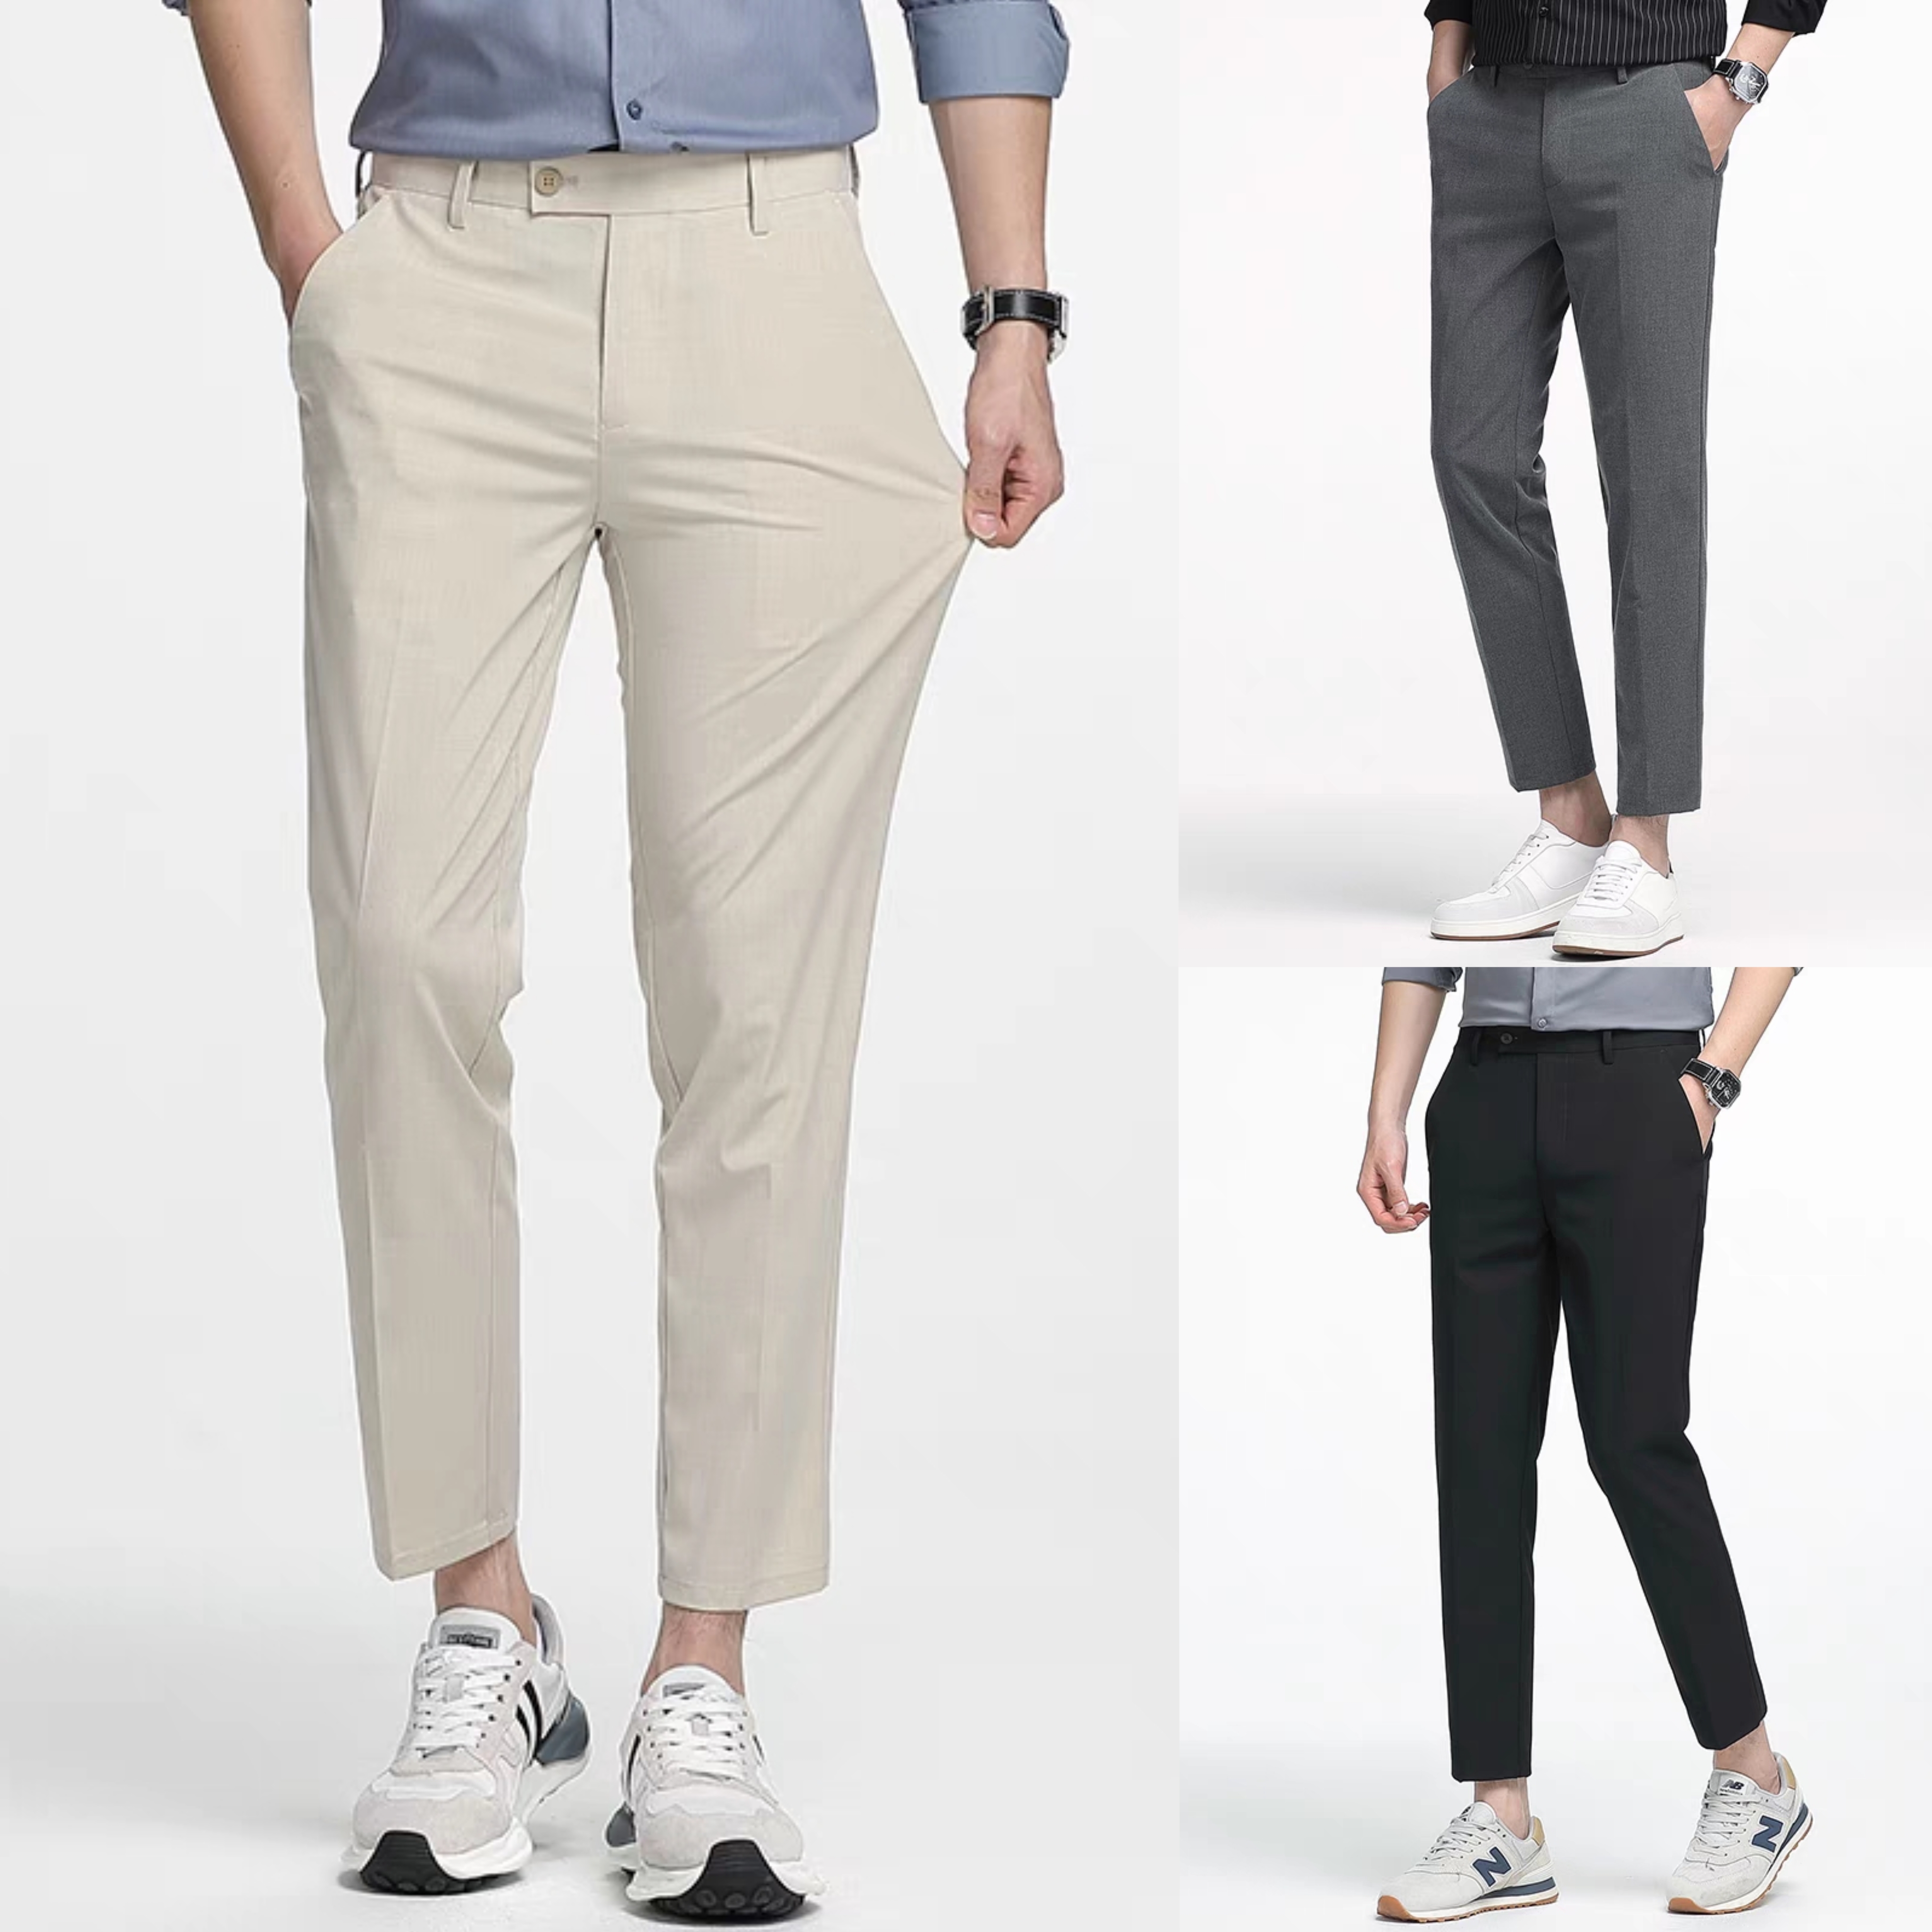 Smart Ankle Length Trousers | UNIQLO UK